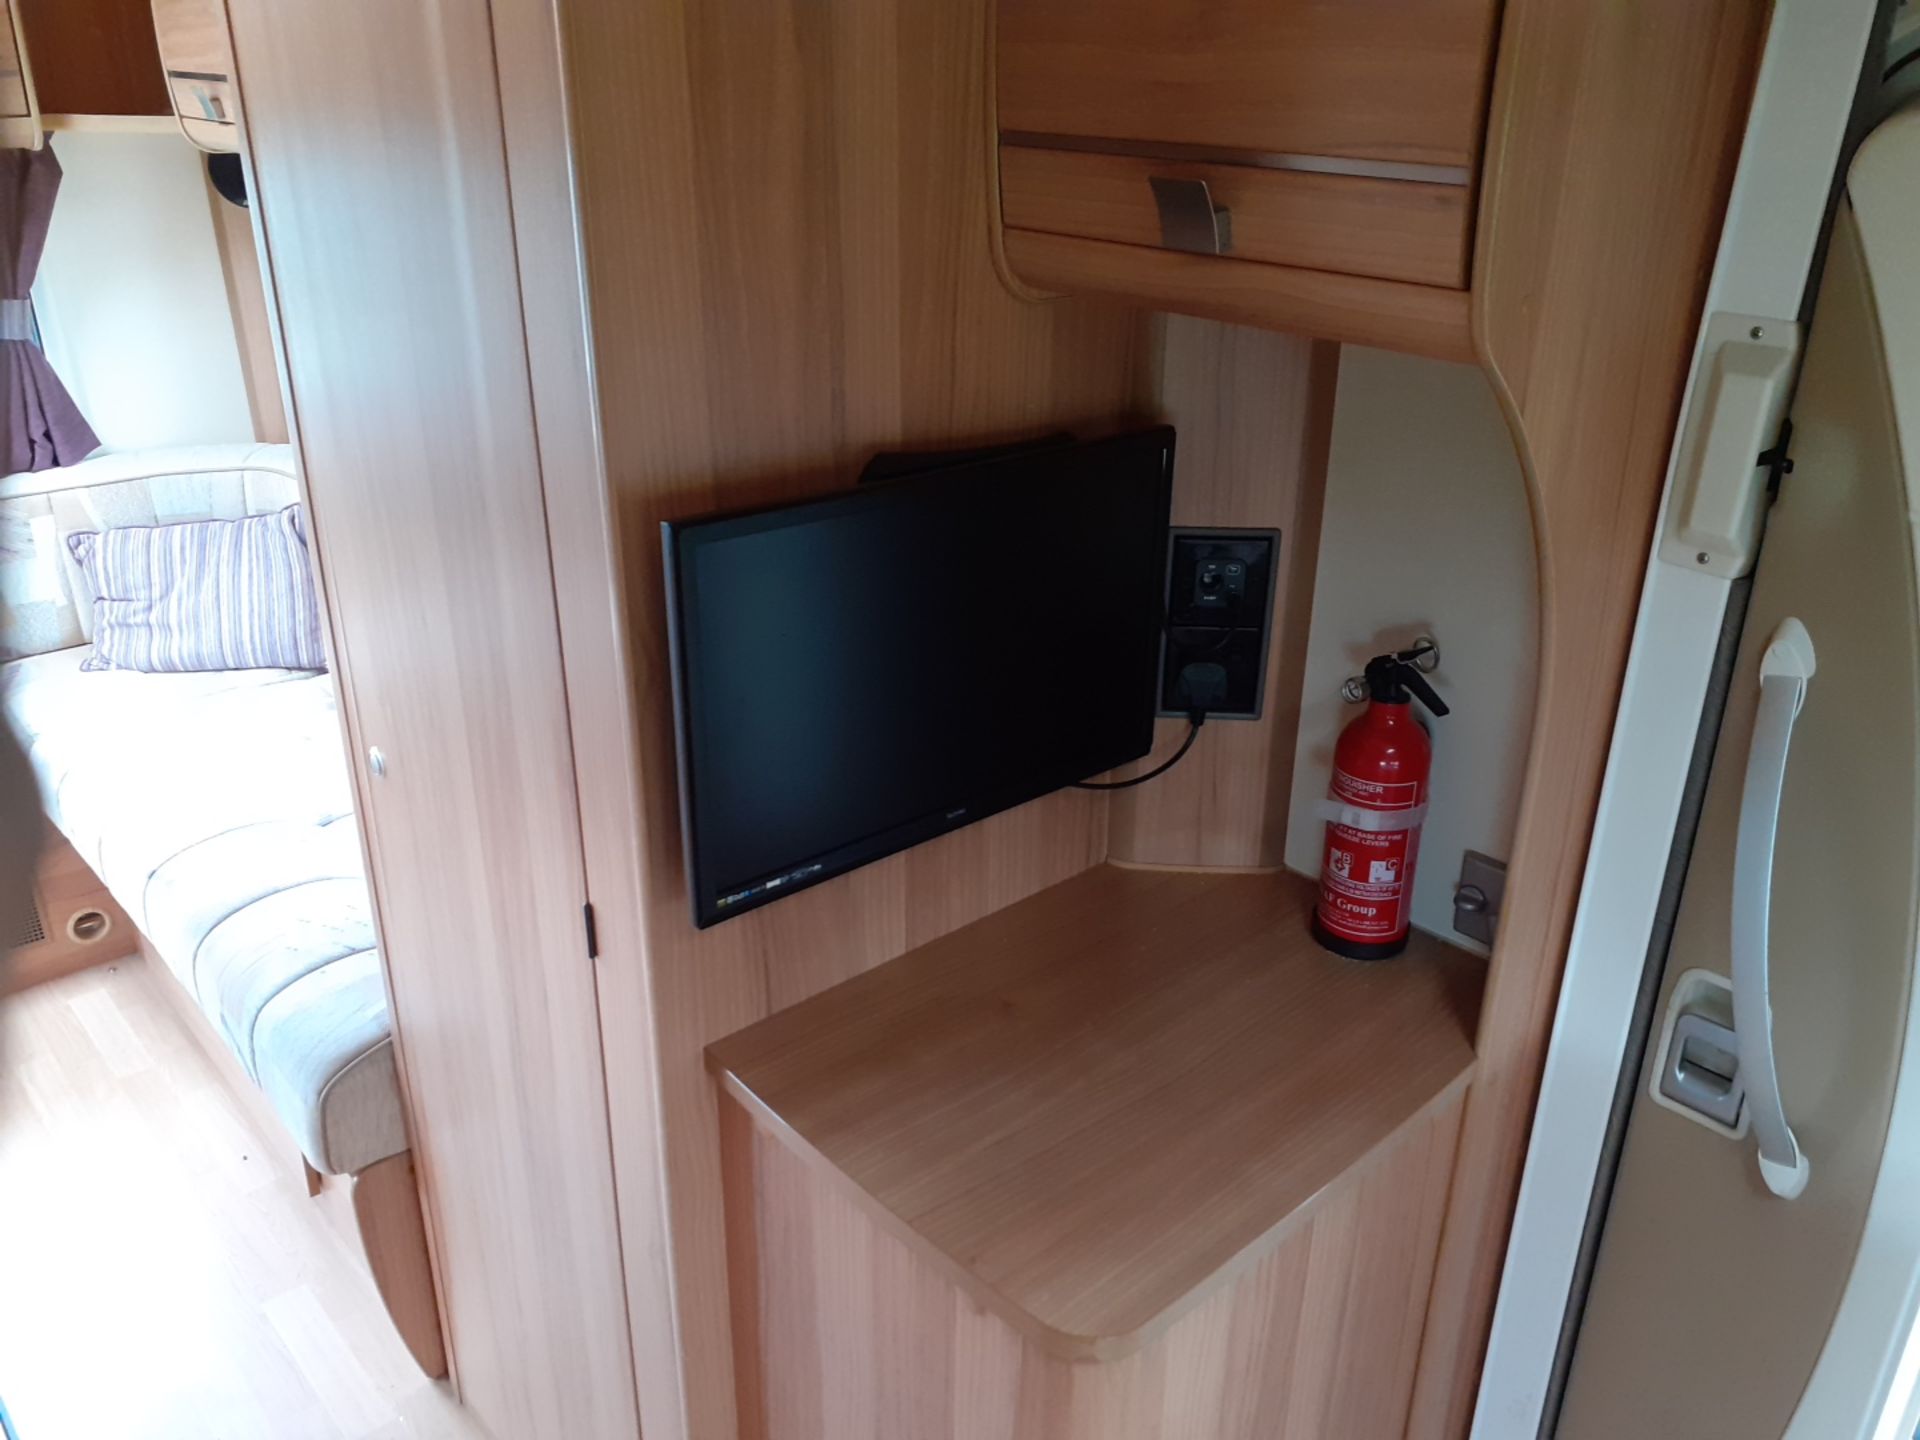 2012 BAILEY APPROACH 760 SE LUXURY 6 BERTH MOTORHOME £10K OF EXTRAS, 30,000 MILES FROM NEW - Image 17 of 31